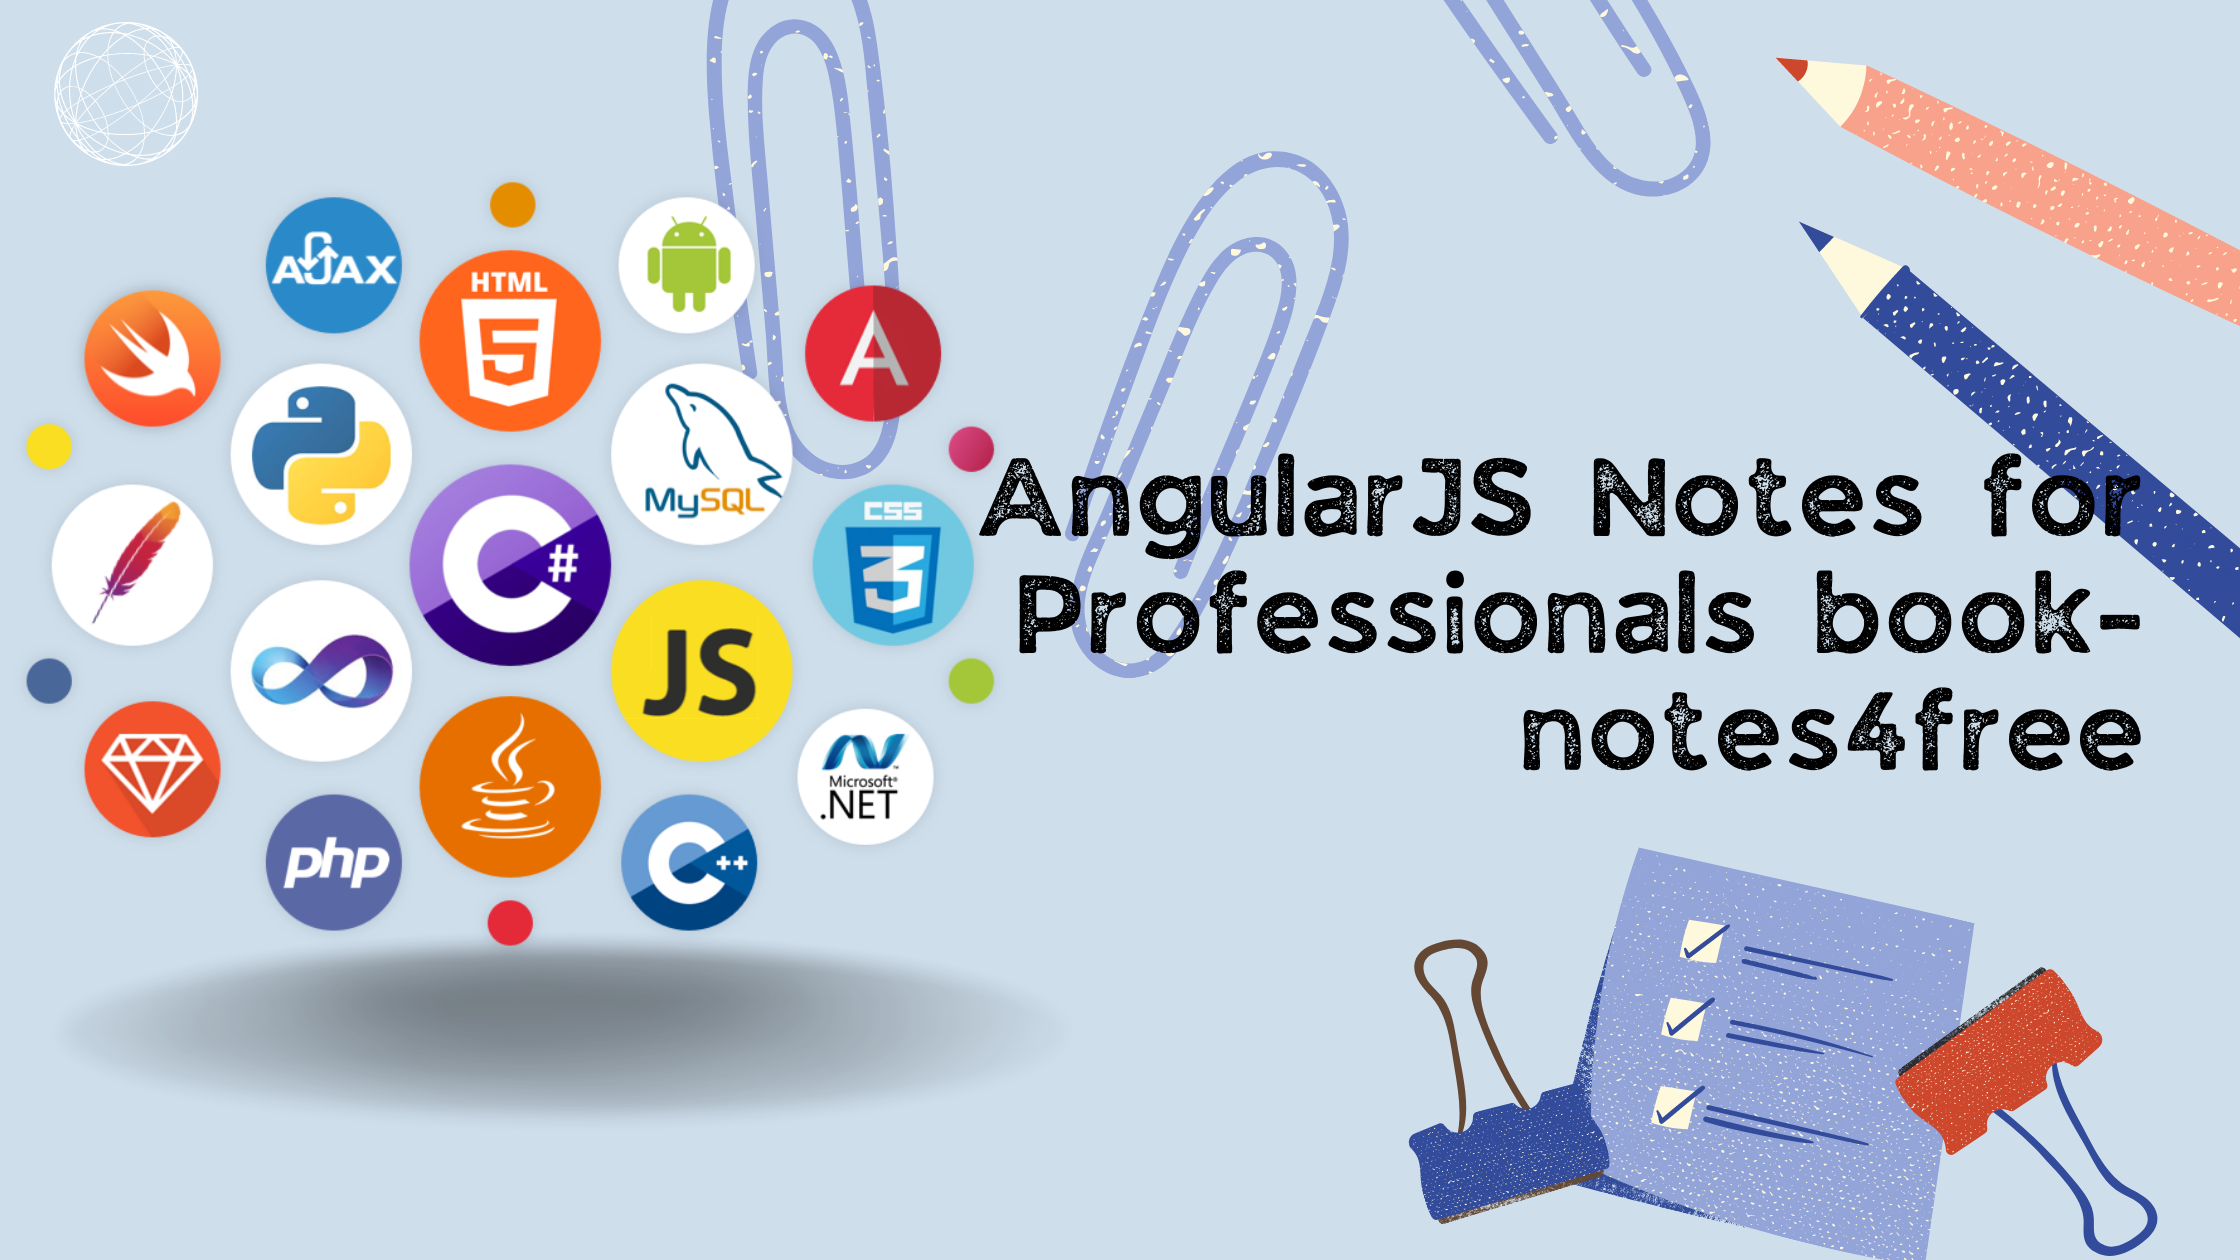  AngularJS Notes for Professionals book-notes2free